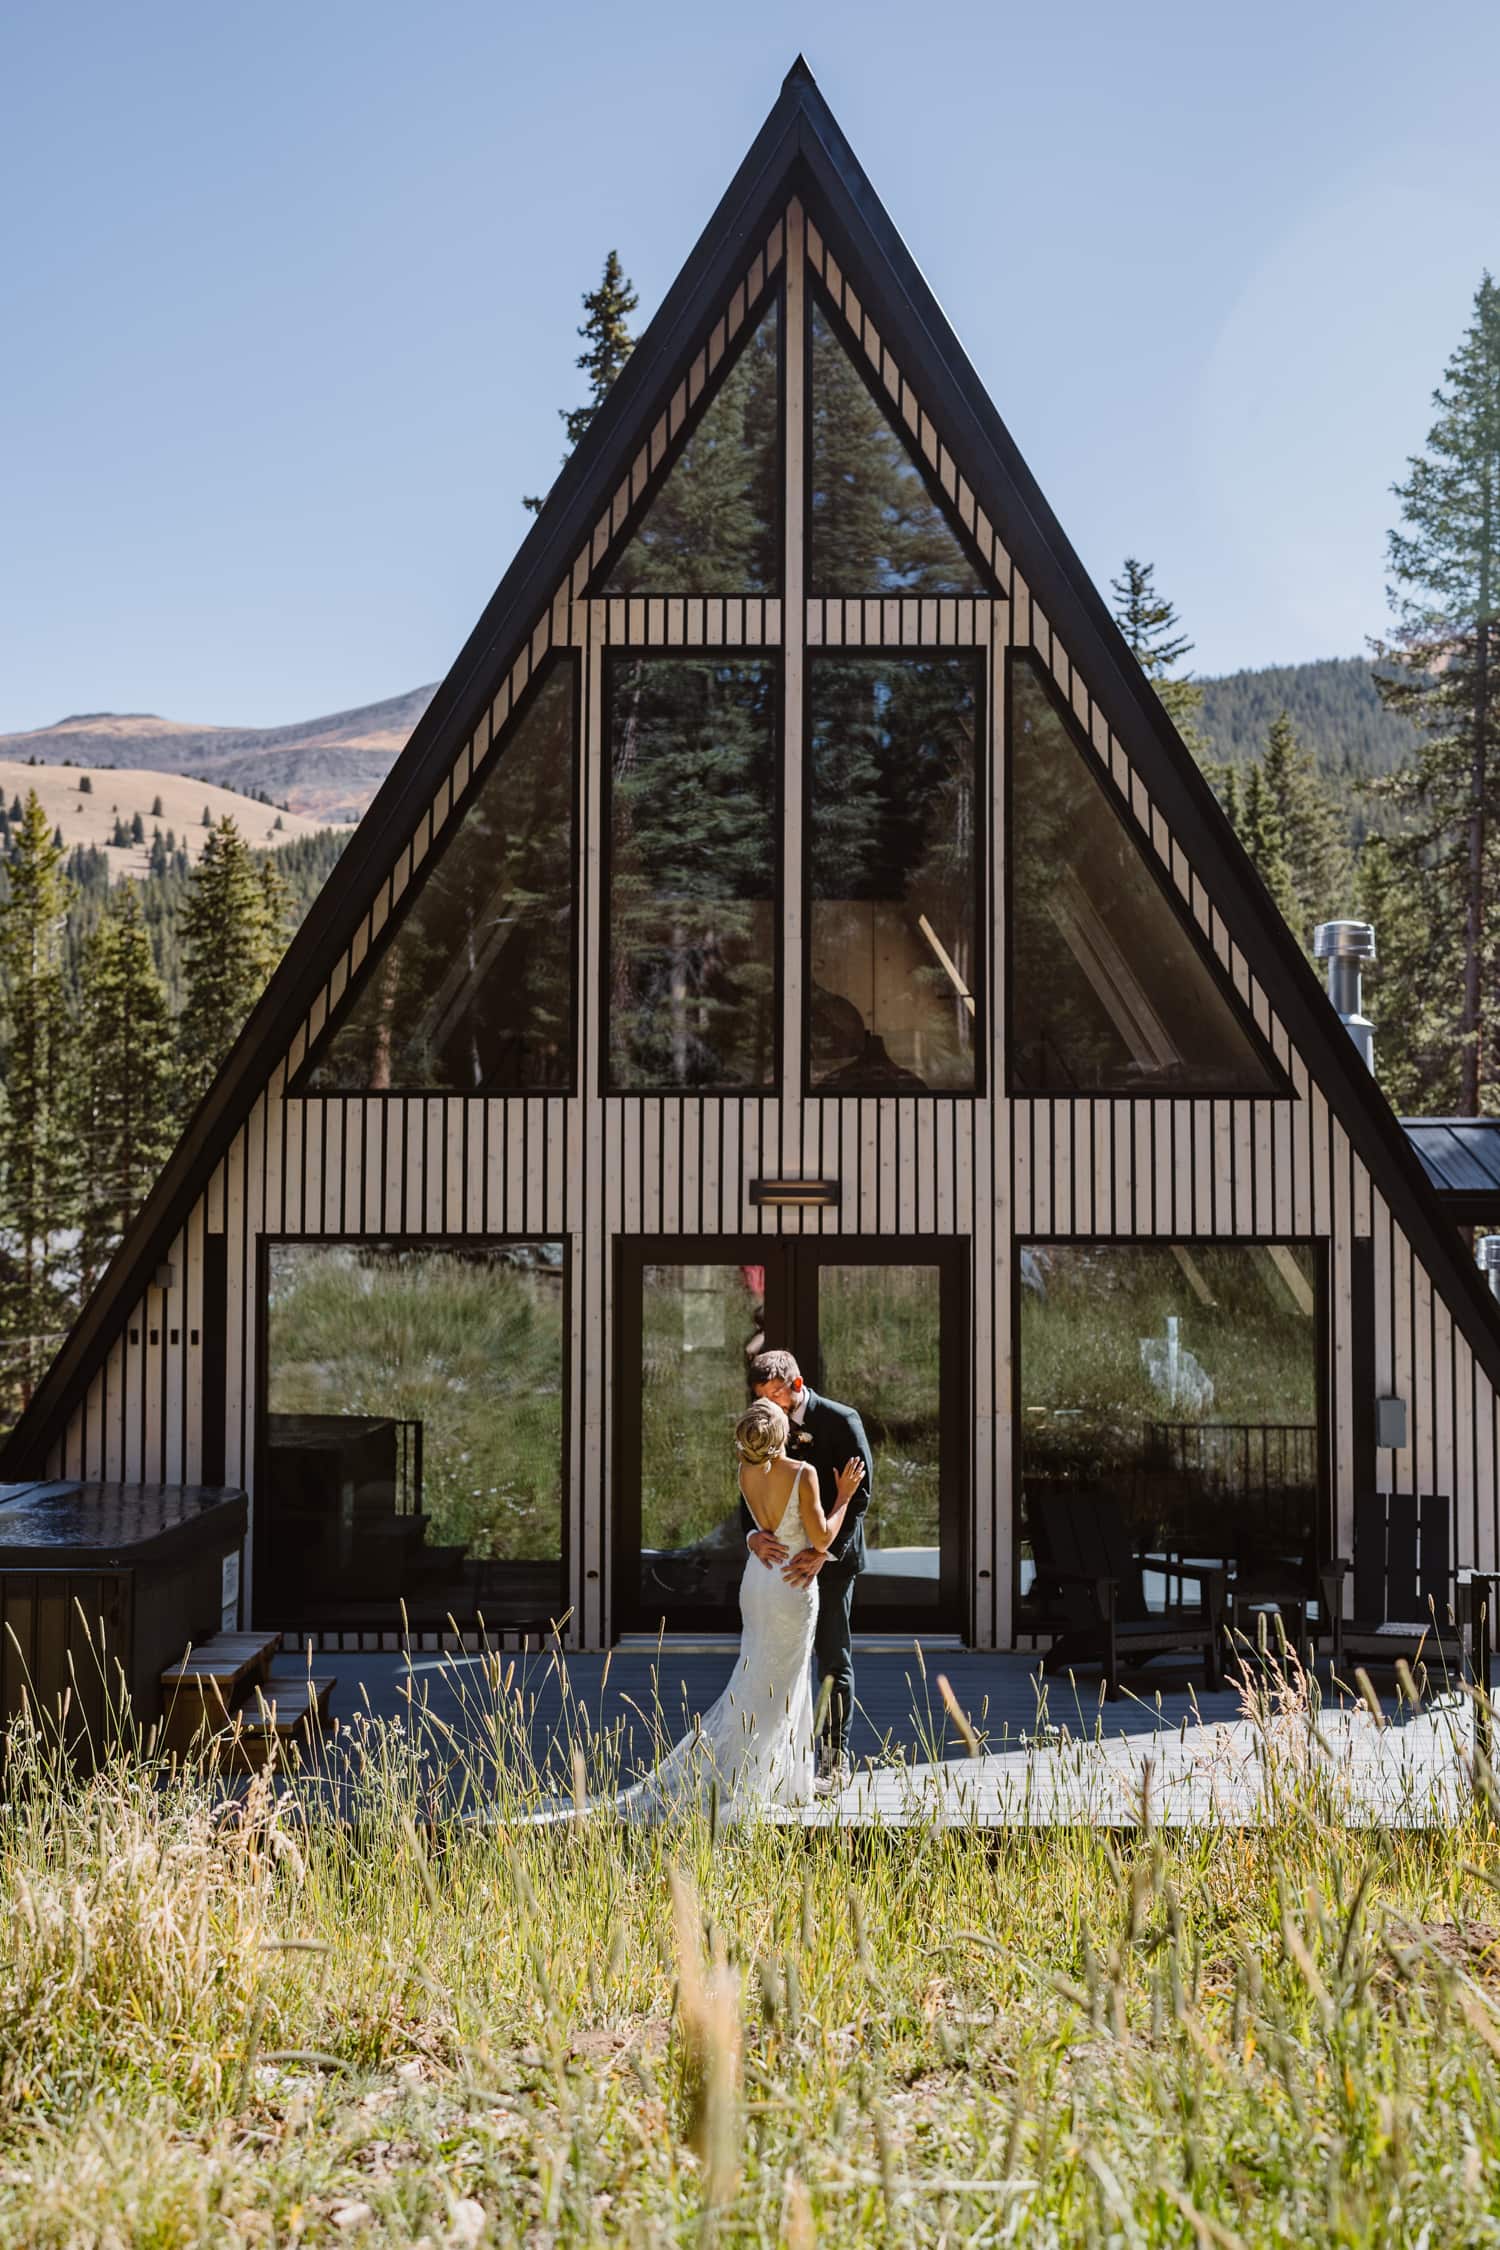 Couple sharing a moment at their airbnb for their Breckenridge elopement.